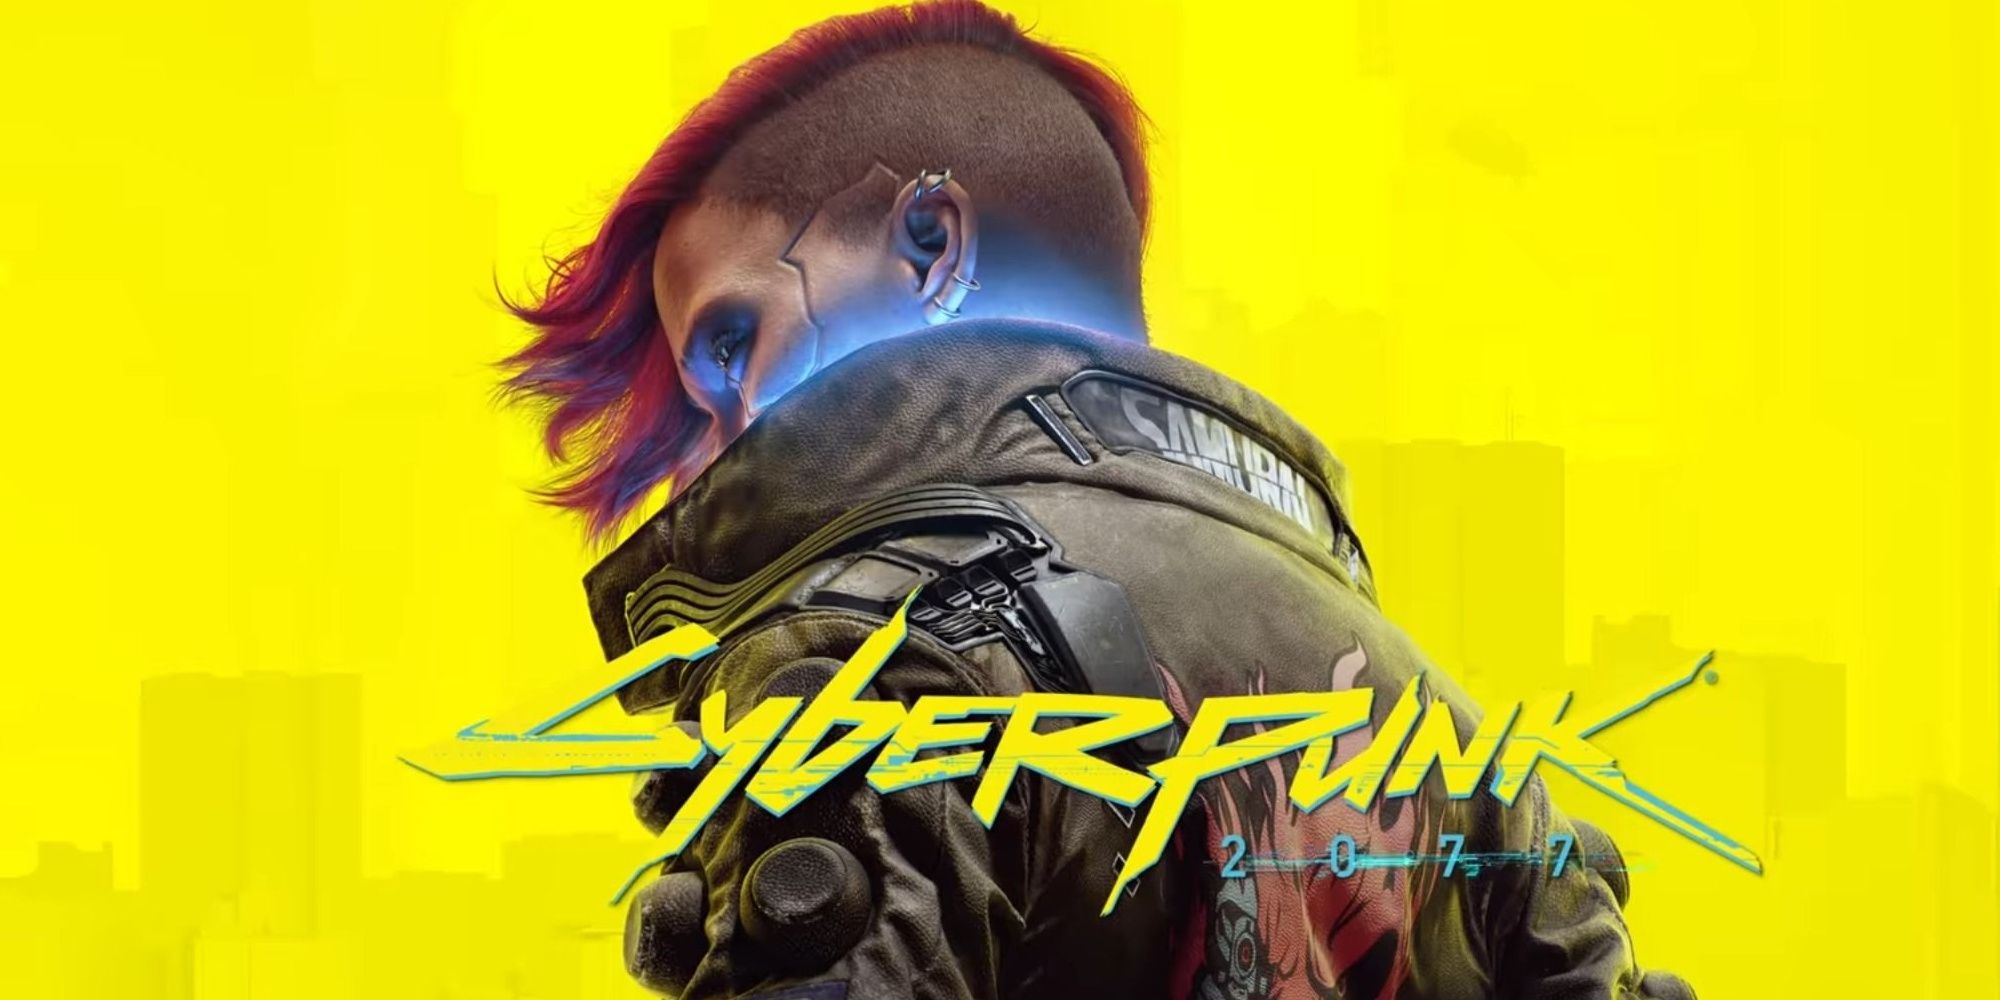 Cyberpunk 2077's original V model is now available